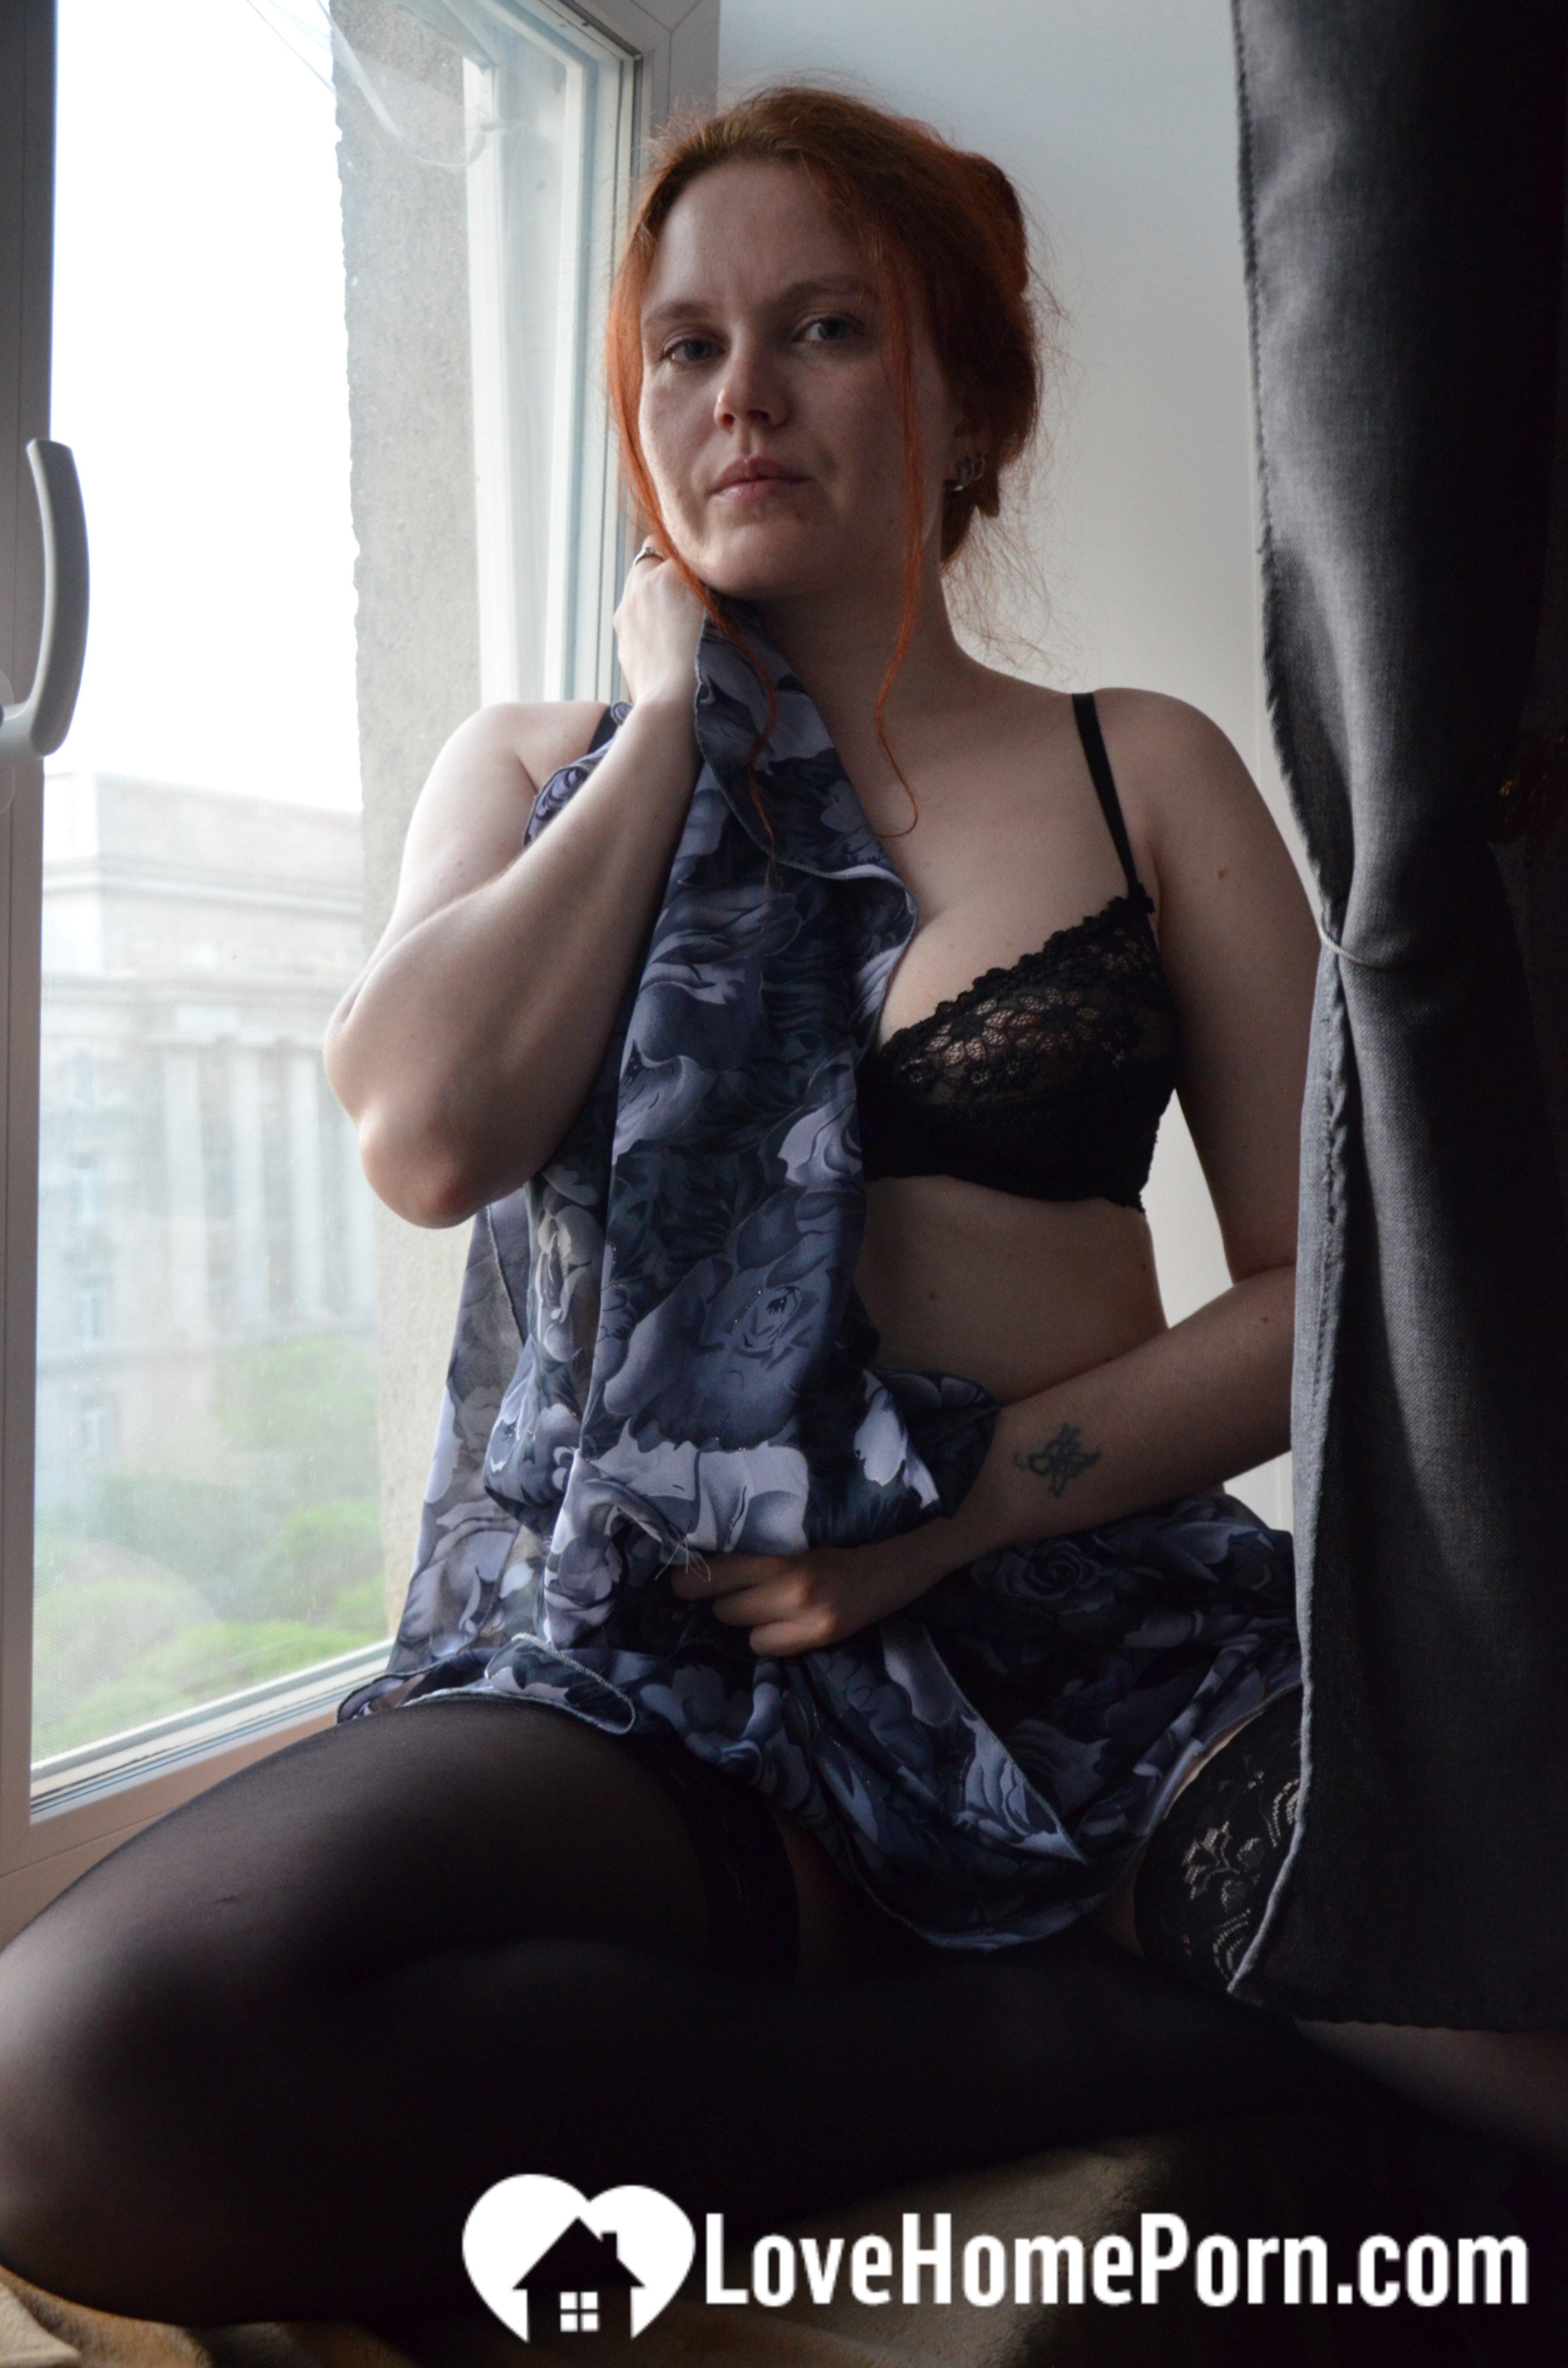 Posing by the window in a hot outfit